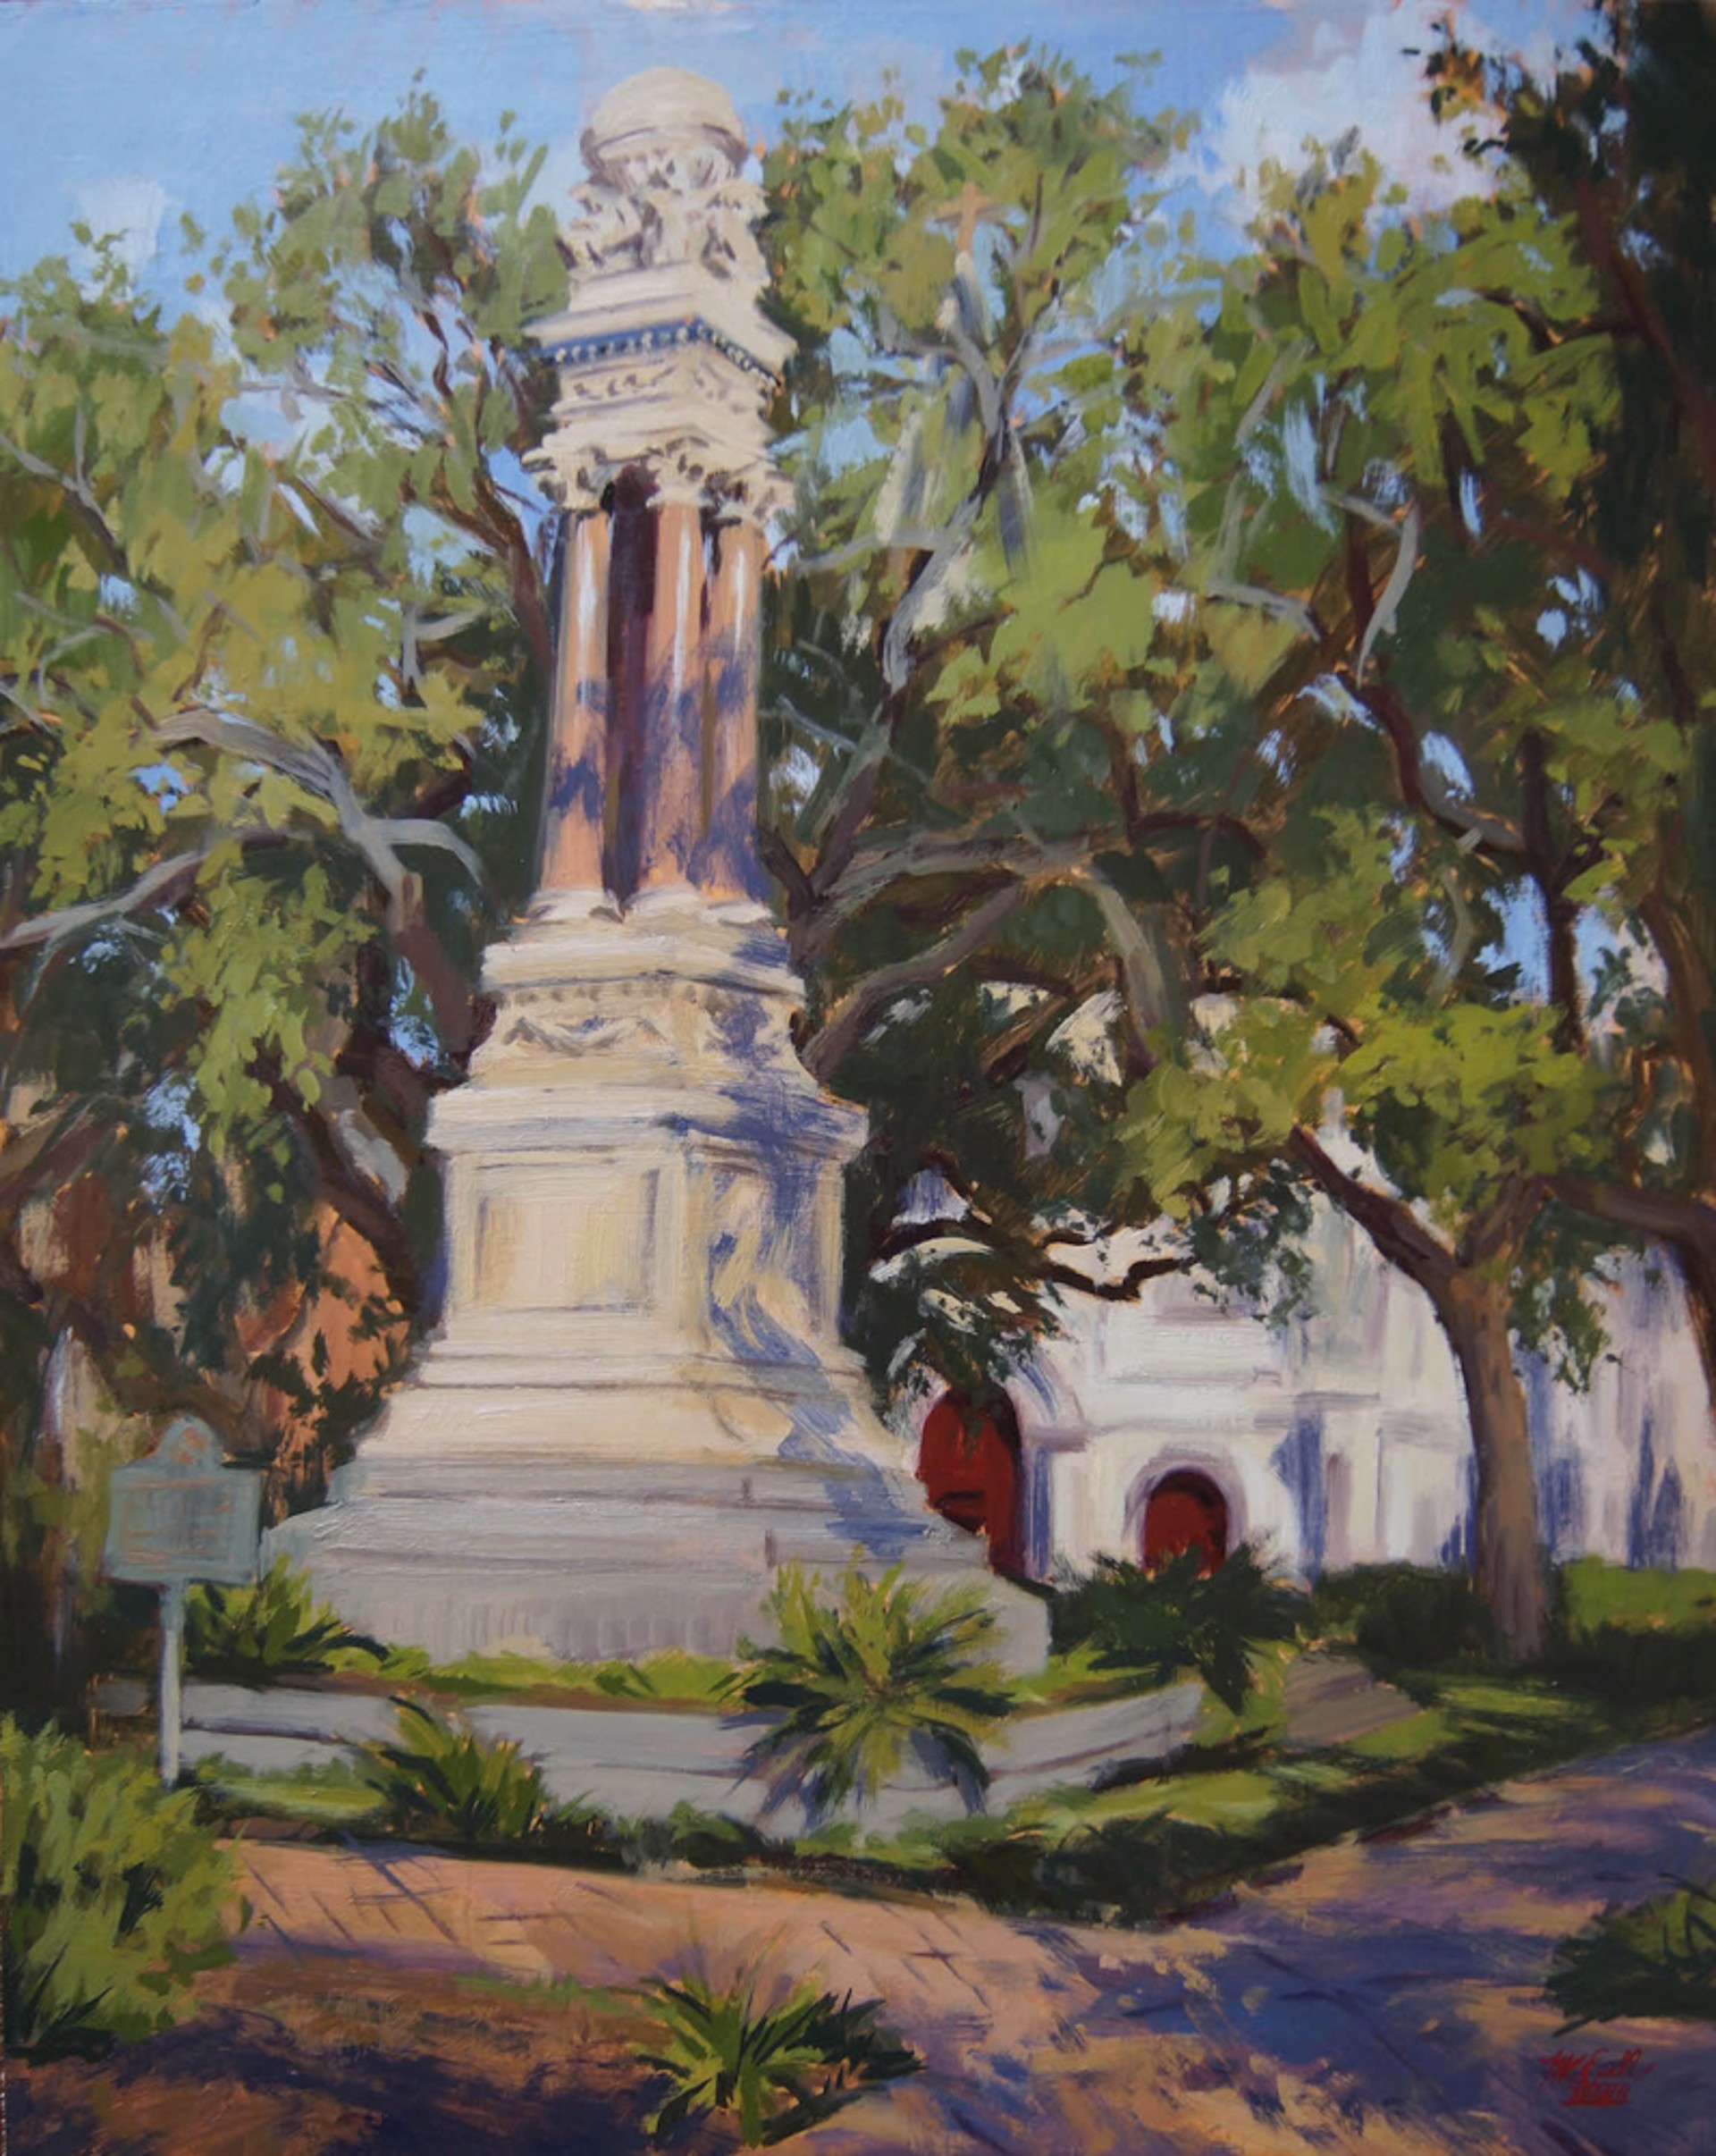 Wright Square Monument by Megan K. Euell